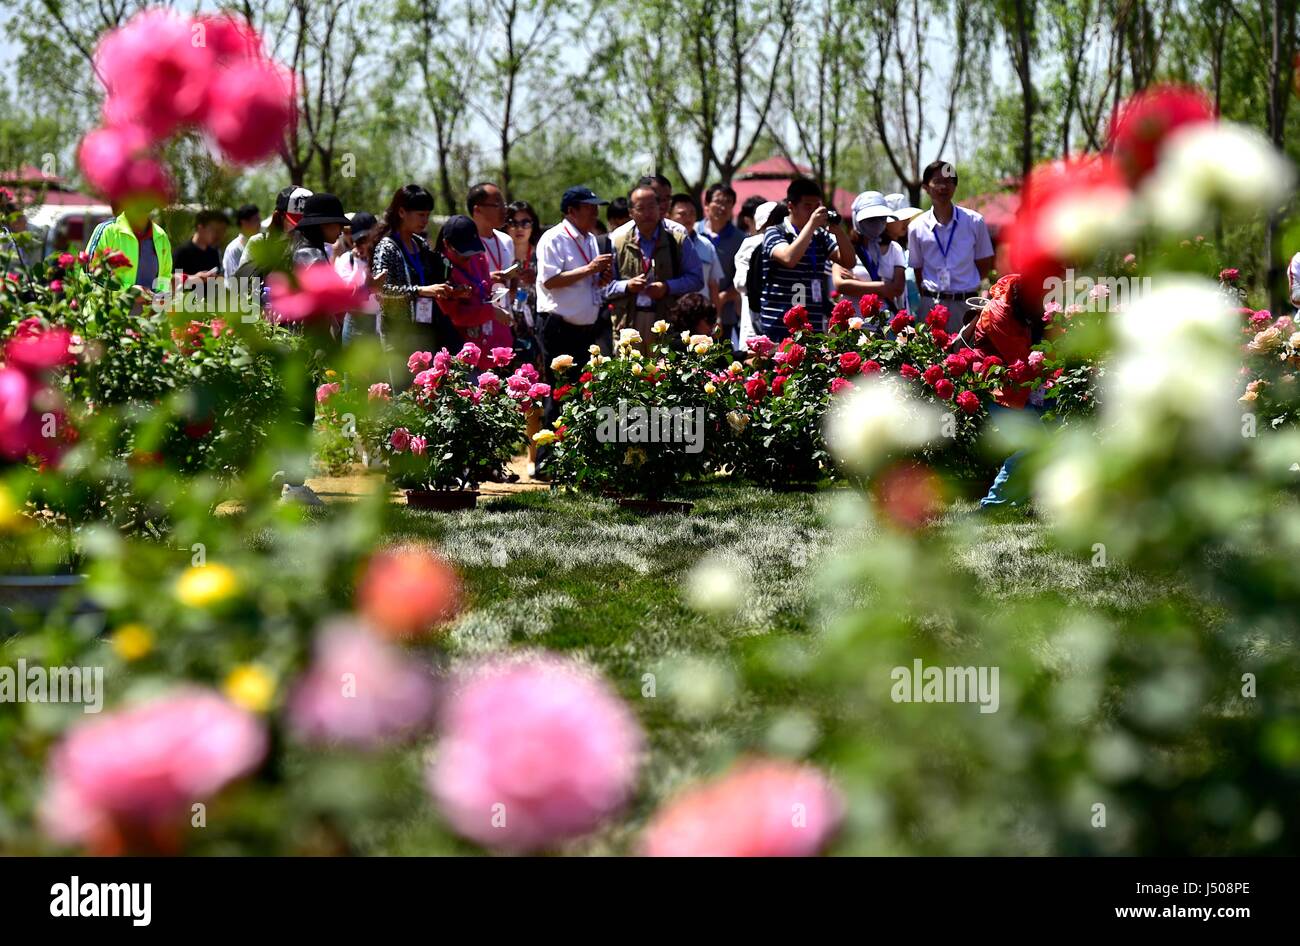 Tianjin China 15th May 2017 Tourists View The Chinese Roses